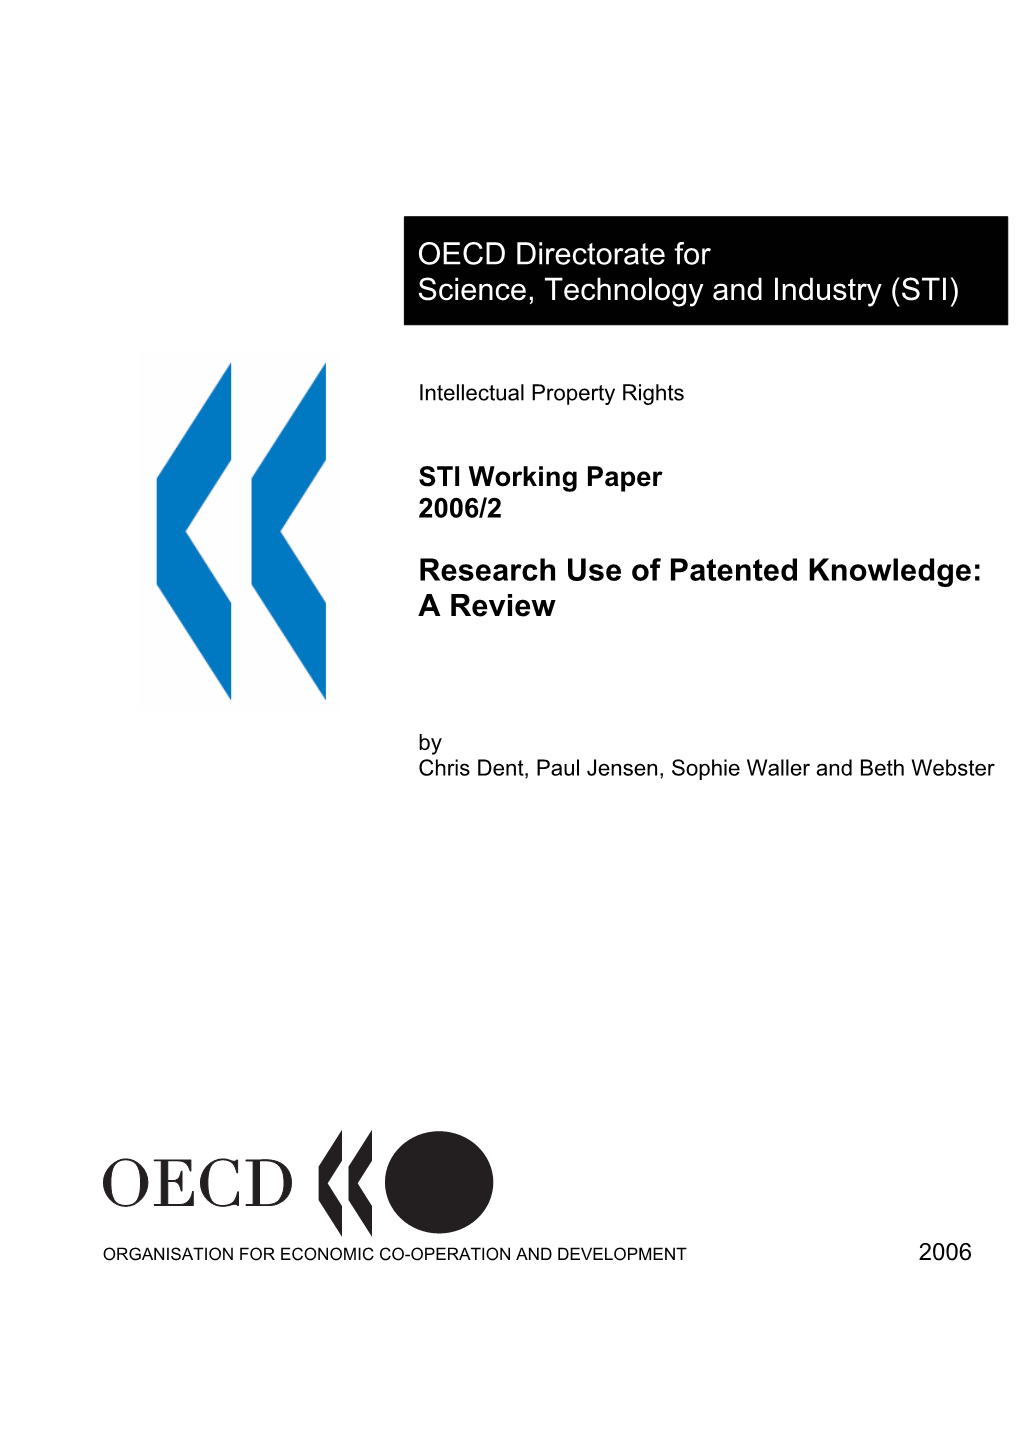 Research Use of Patented Knowledge: a Review